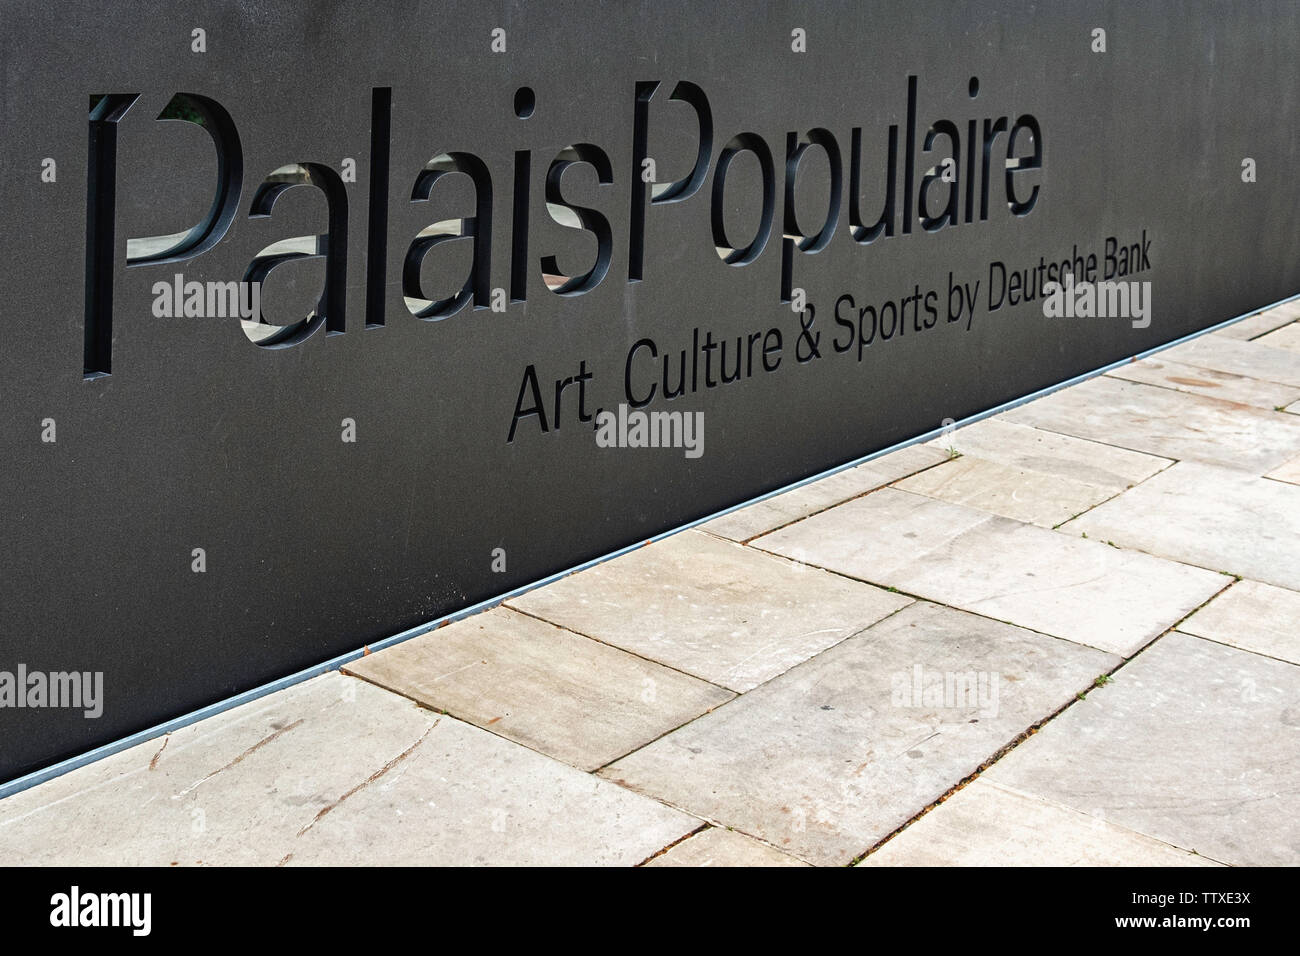 Palais Populaire Art, Culture & Sports By Deutsche Bank. Gallery, cafe & events venue In Mitte-Berlin Stock Photo